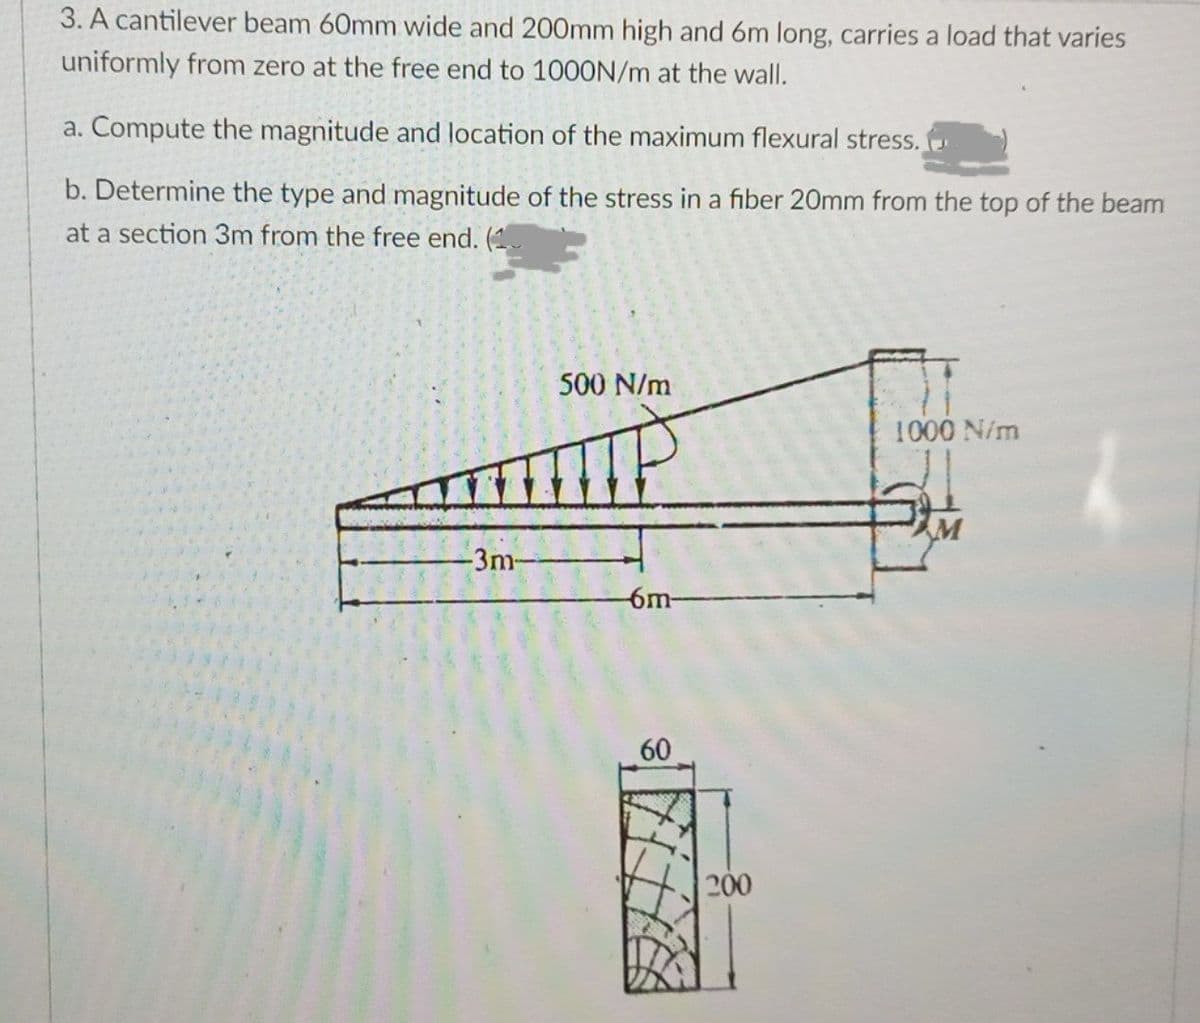 3. A cantilever beam 60mm wide and 200mm high and 6m long, carries a load that varies
uniformly from zero at the free end to 100ON/m at the wall.
a. Compute the magnitude and location of the maximum flexural stress.
b. Determine the type and magnitude of the stress in a fiber 20mm from the top of the beam
at a section 3m from the free end. (
500 N/m
1000 N/m
-3m-
-6m-
60
200
